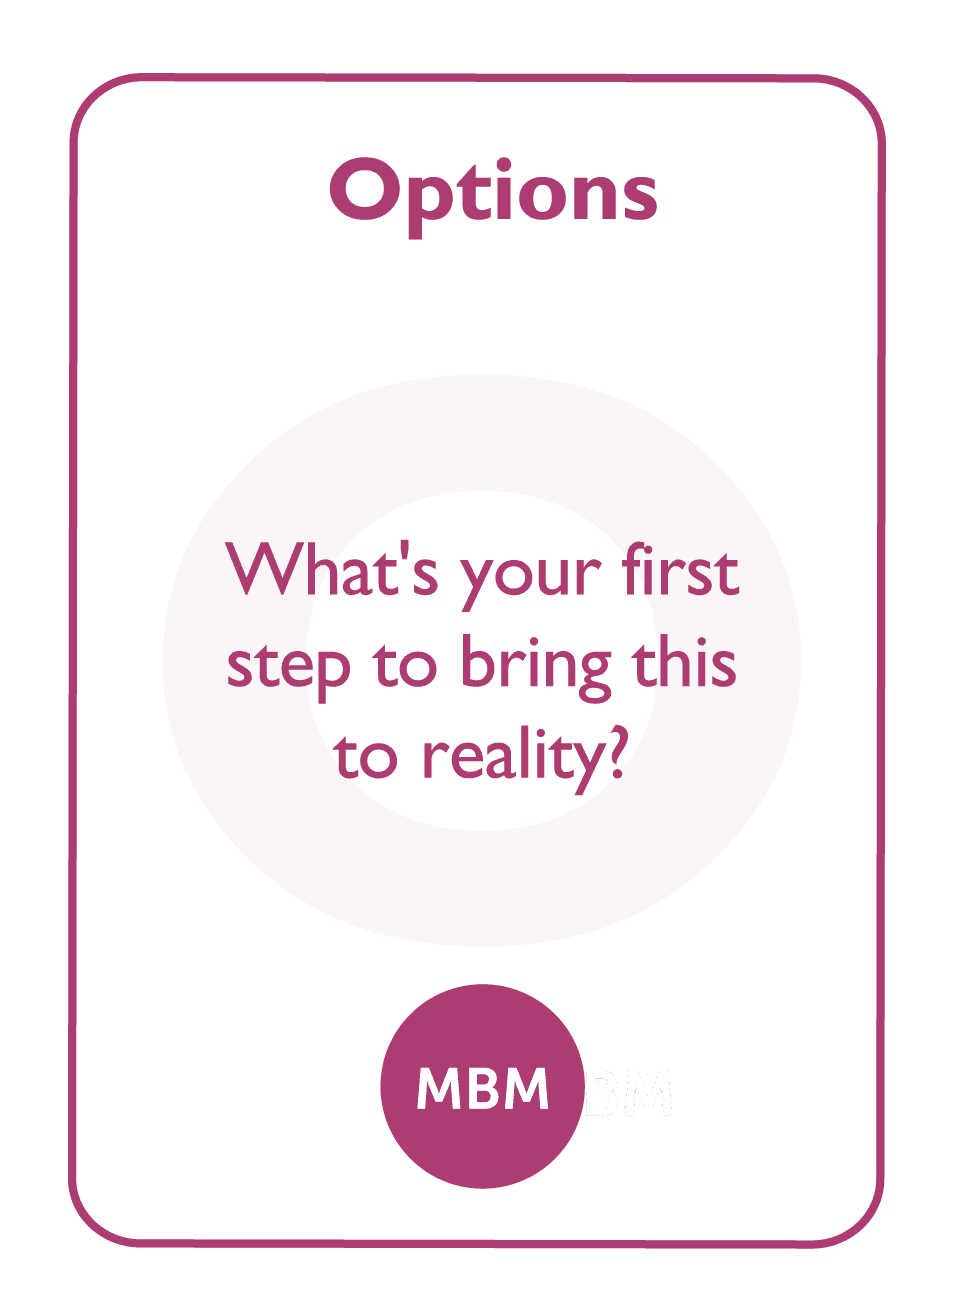 Coaching card titled Options